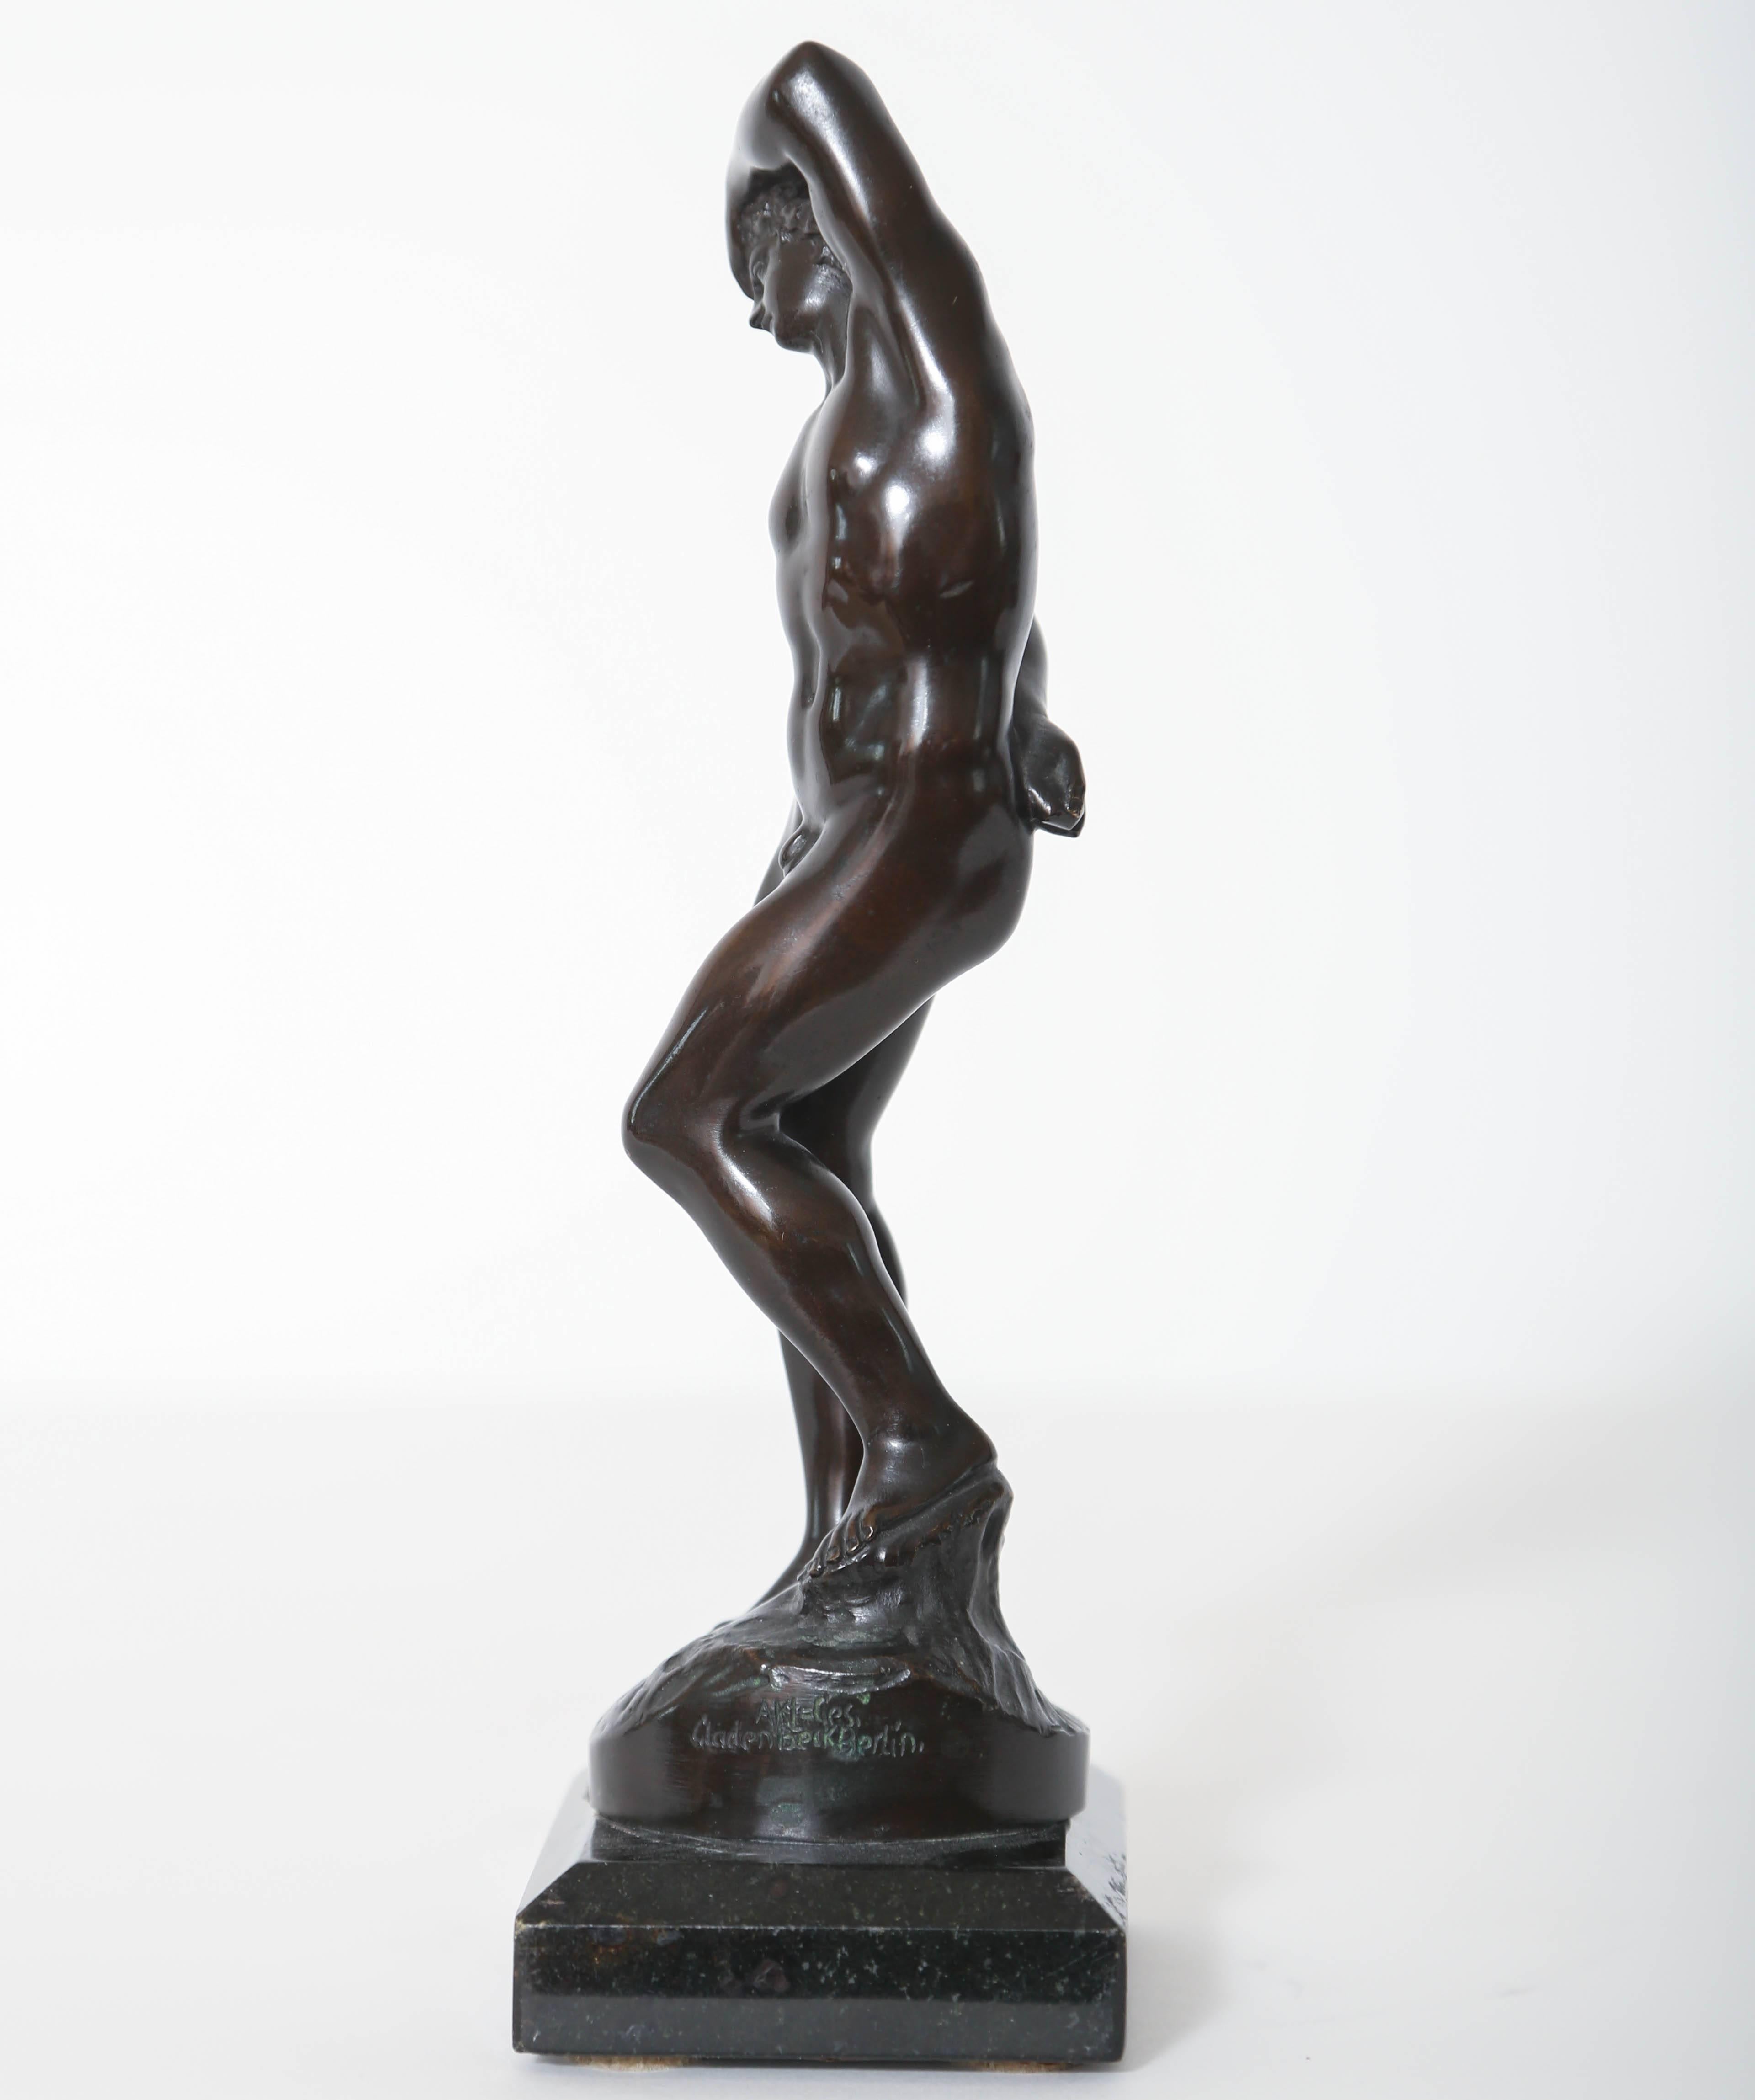 Neoclassical Revival Bronze Sculpture of Nude Narcissus, after Barthelemy Prieur, German, circa 1900